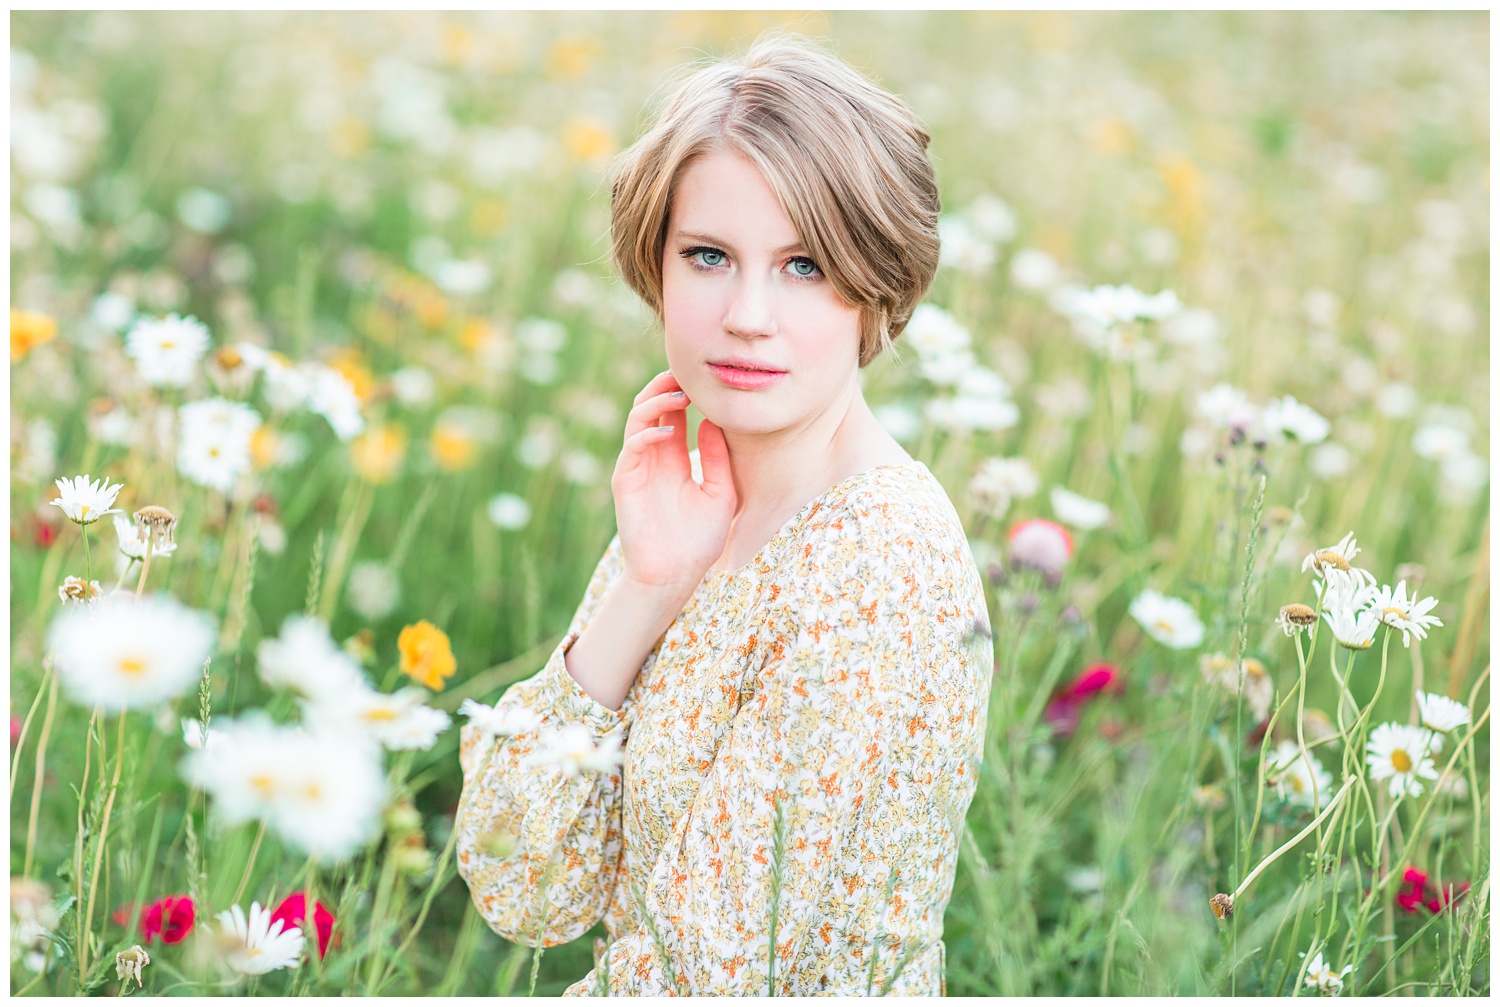 Vintage, film inspired, 70s retro styled senior photoshoot at golden hour in a floral field. | CB Studio